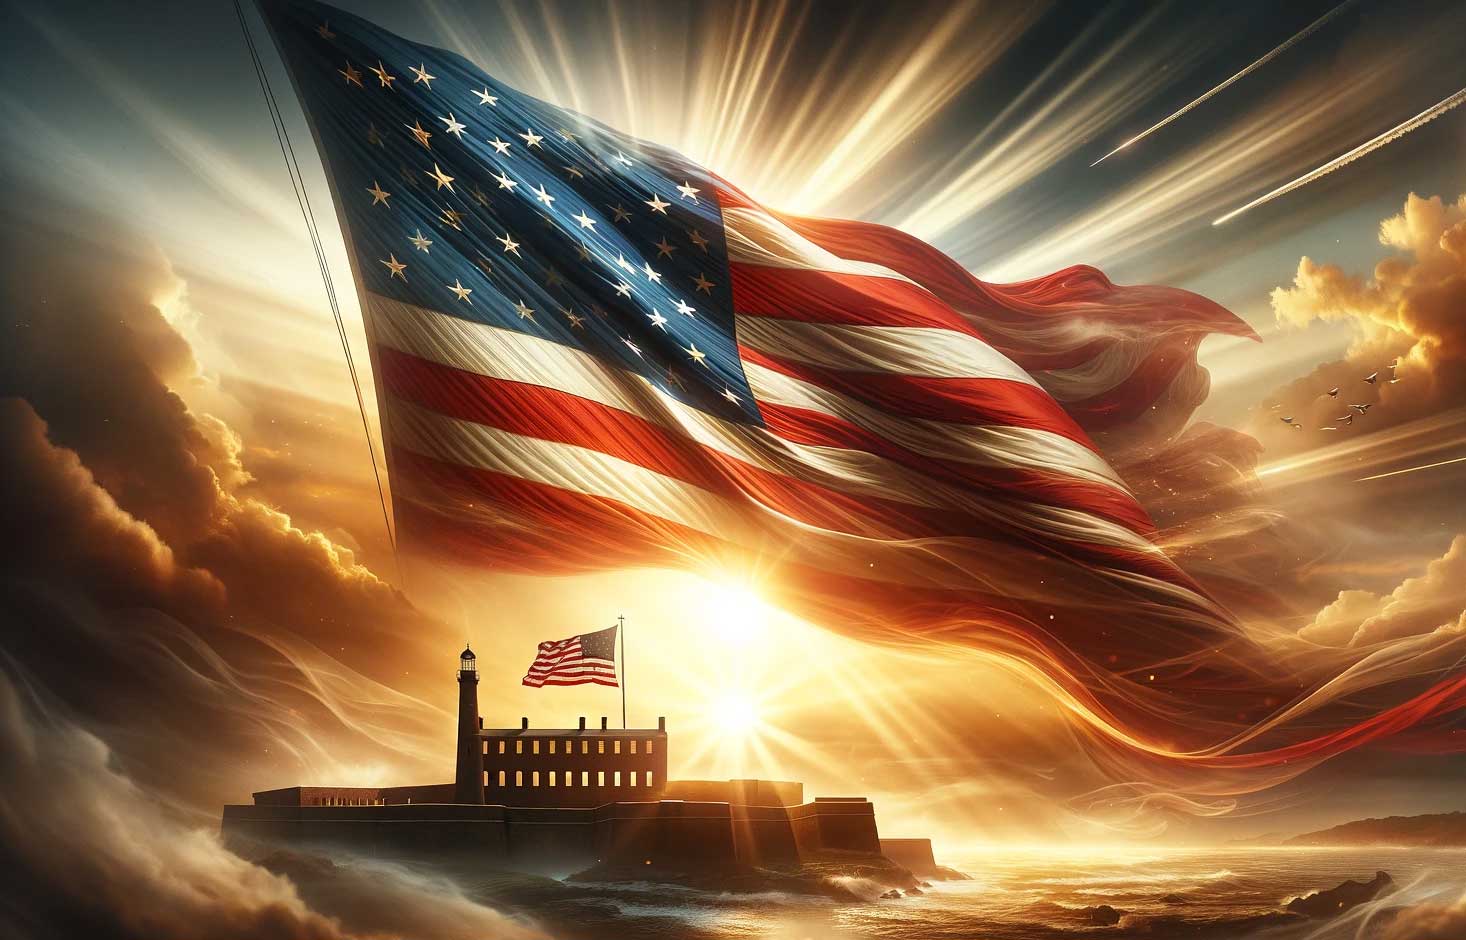 The Star Spangled Banner and Fort McHenry  1812